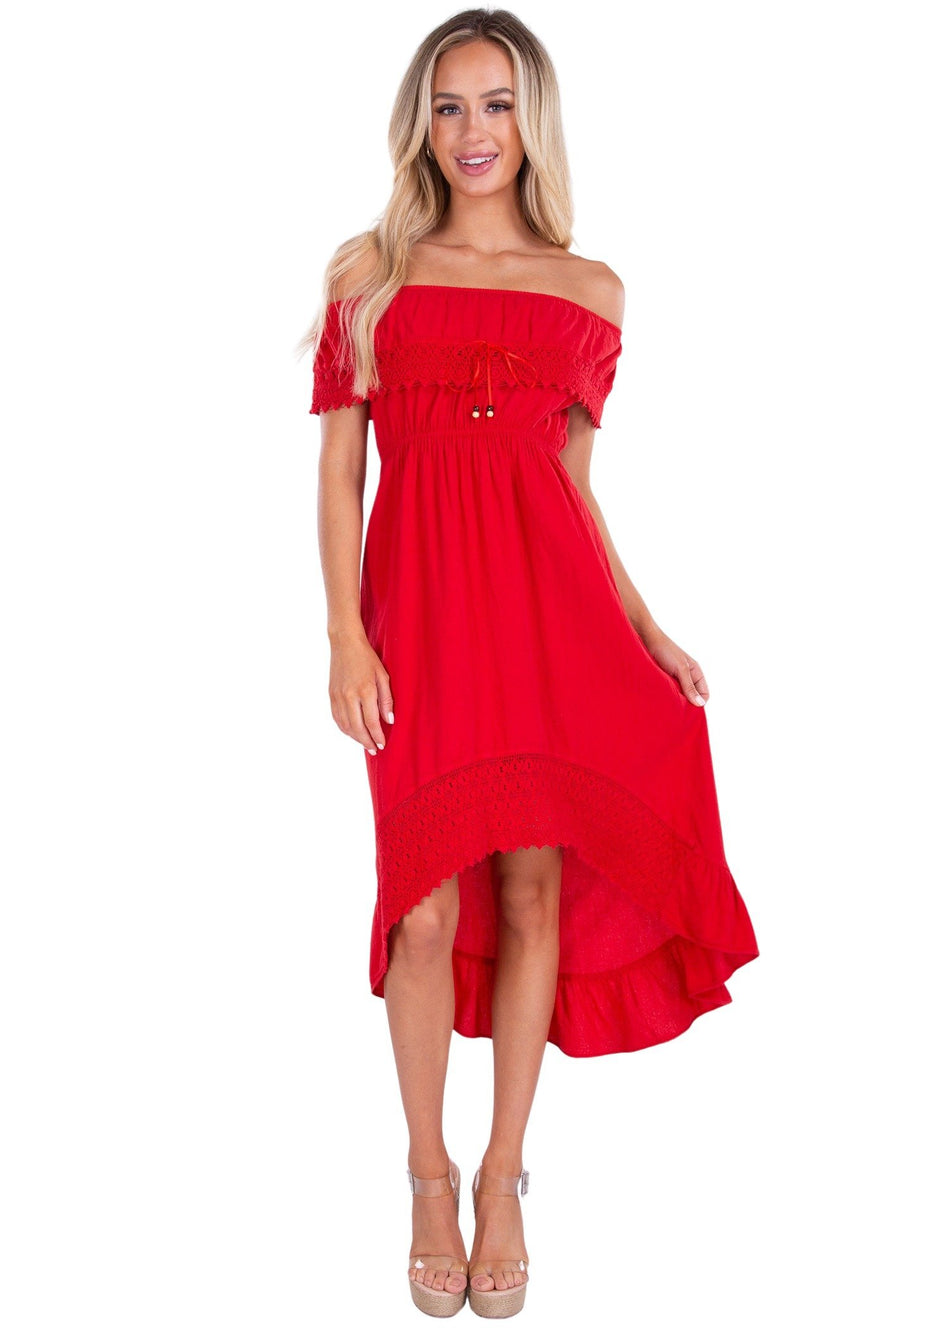 NW1083 - Red Cotton Dress